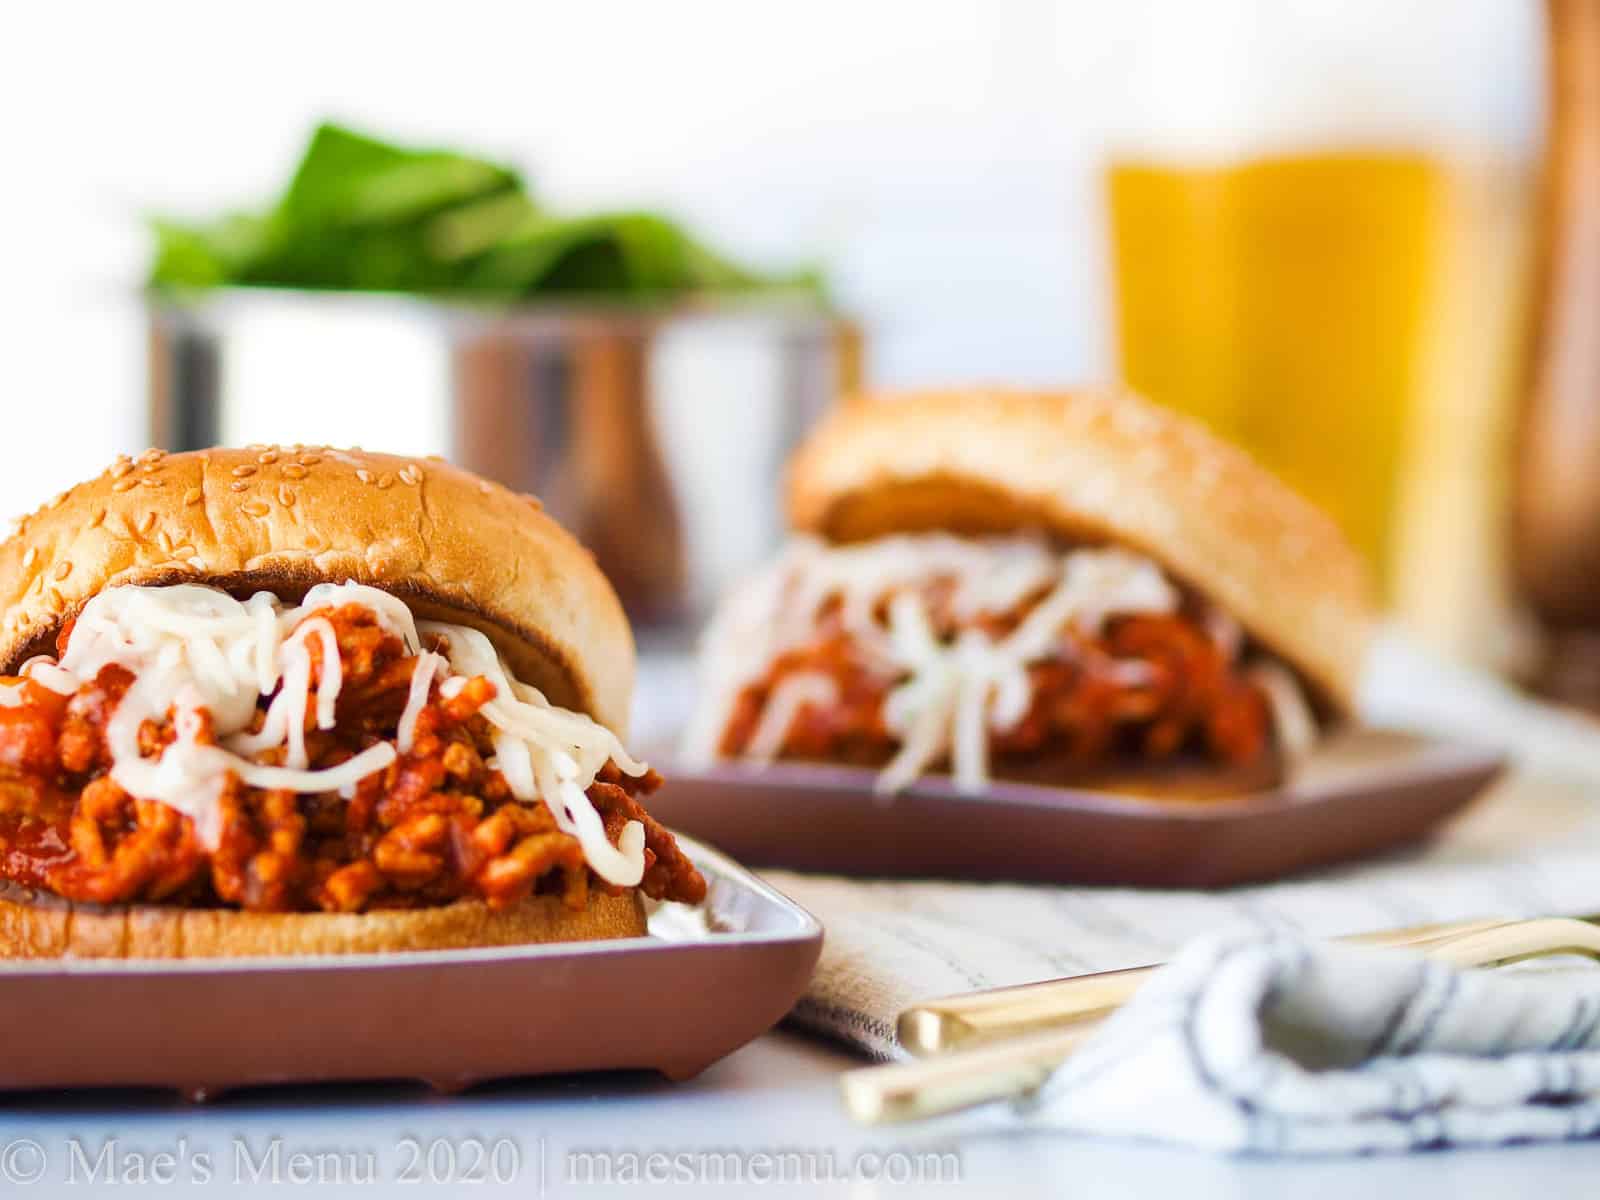 Two turkey sloppy joes on small plates with a glass of beer and a salad behind it.